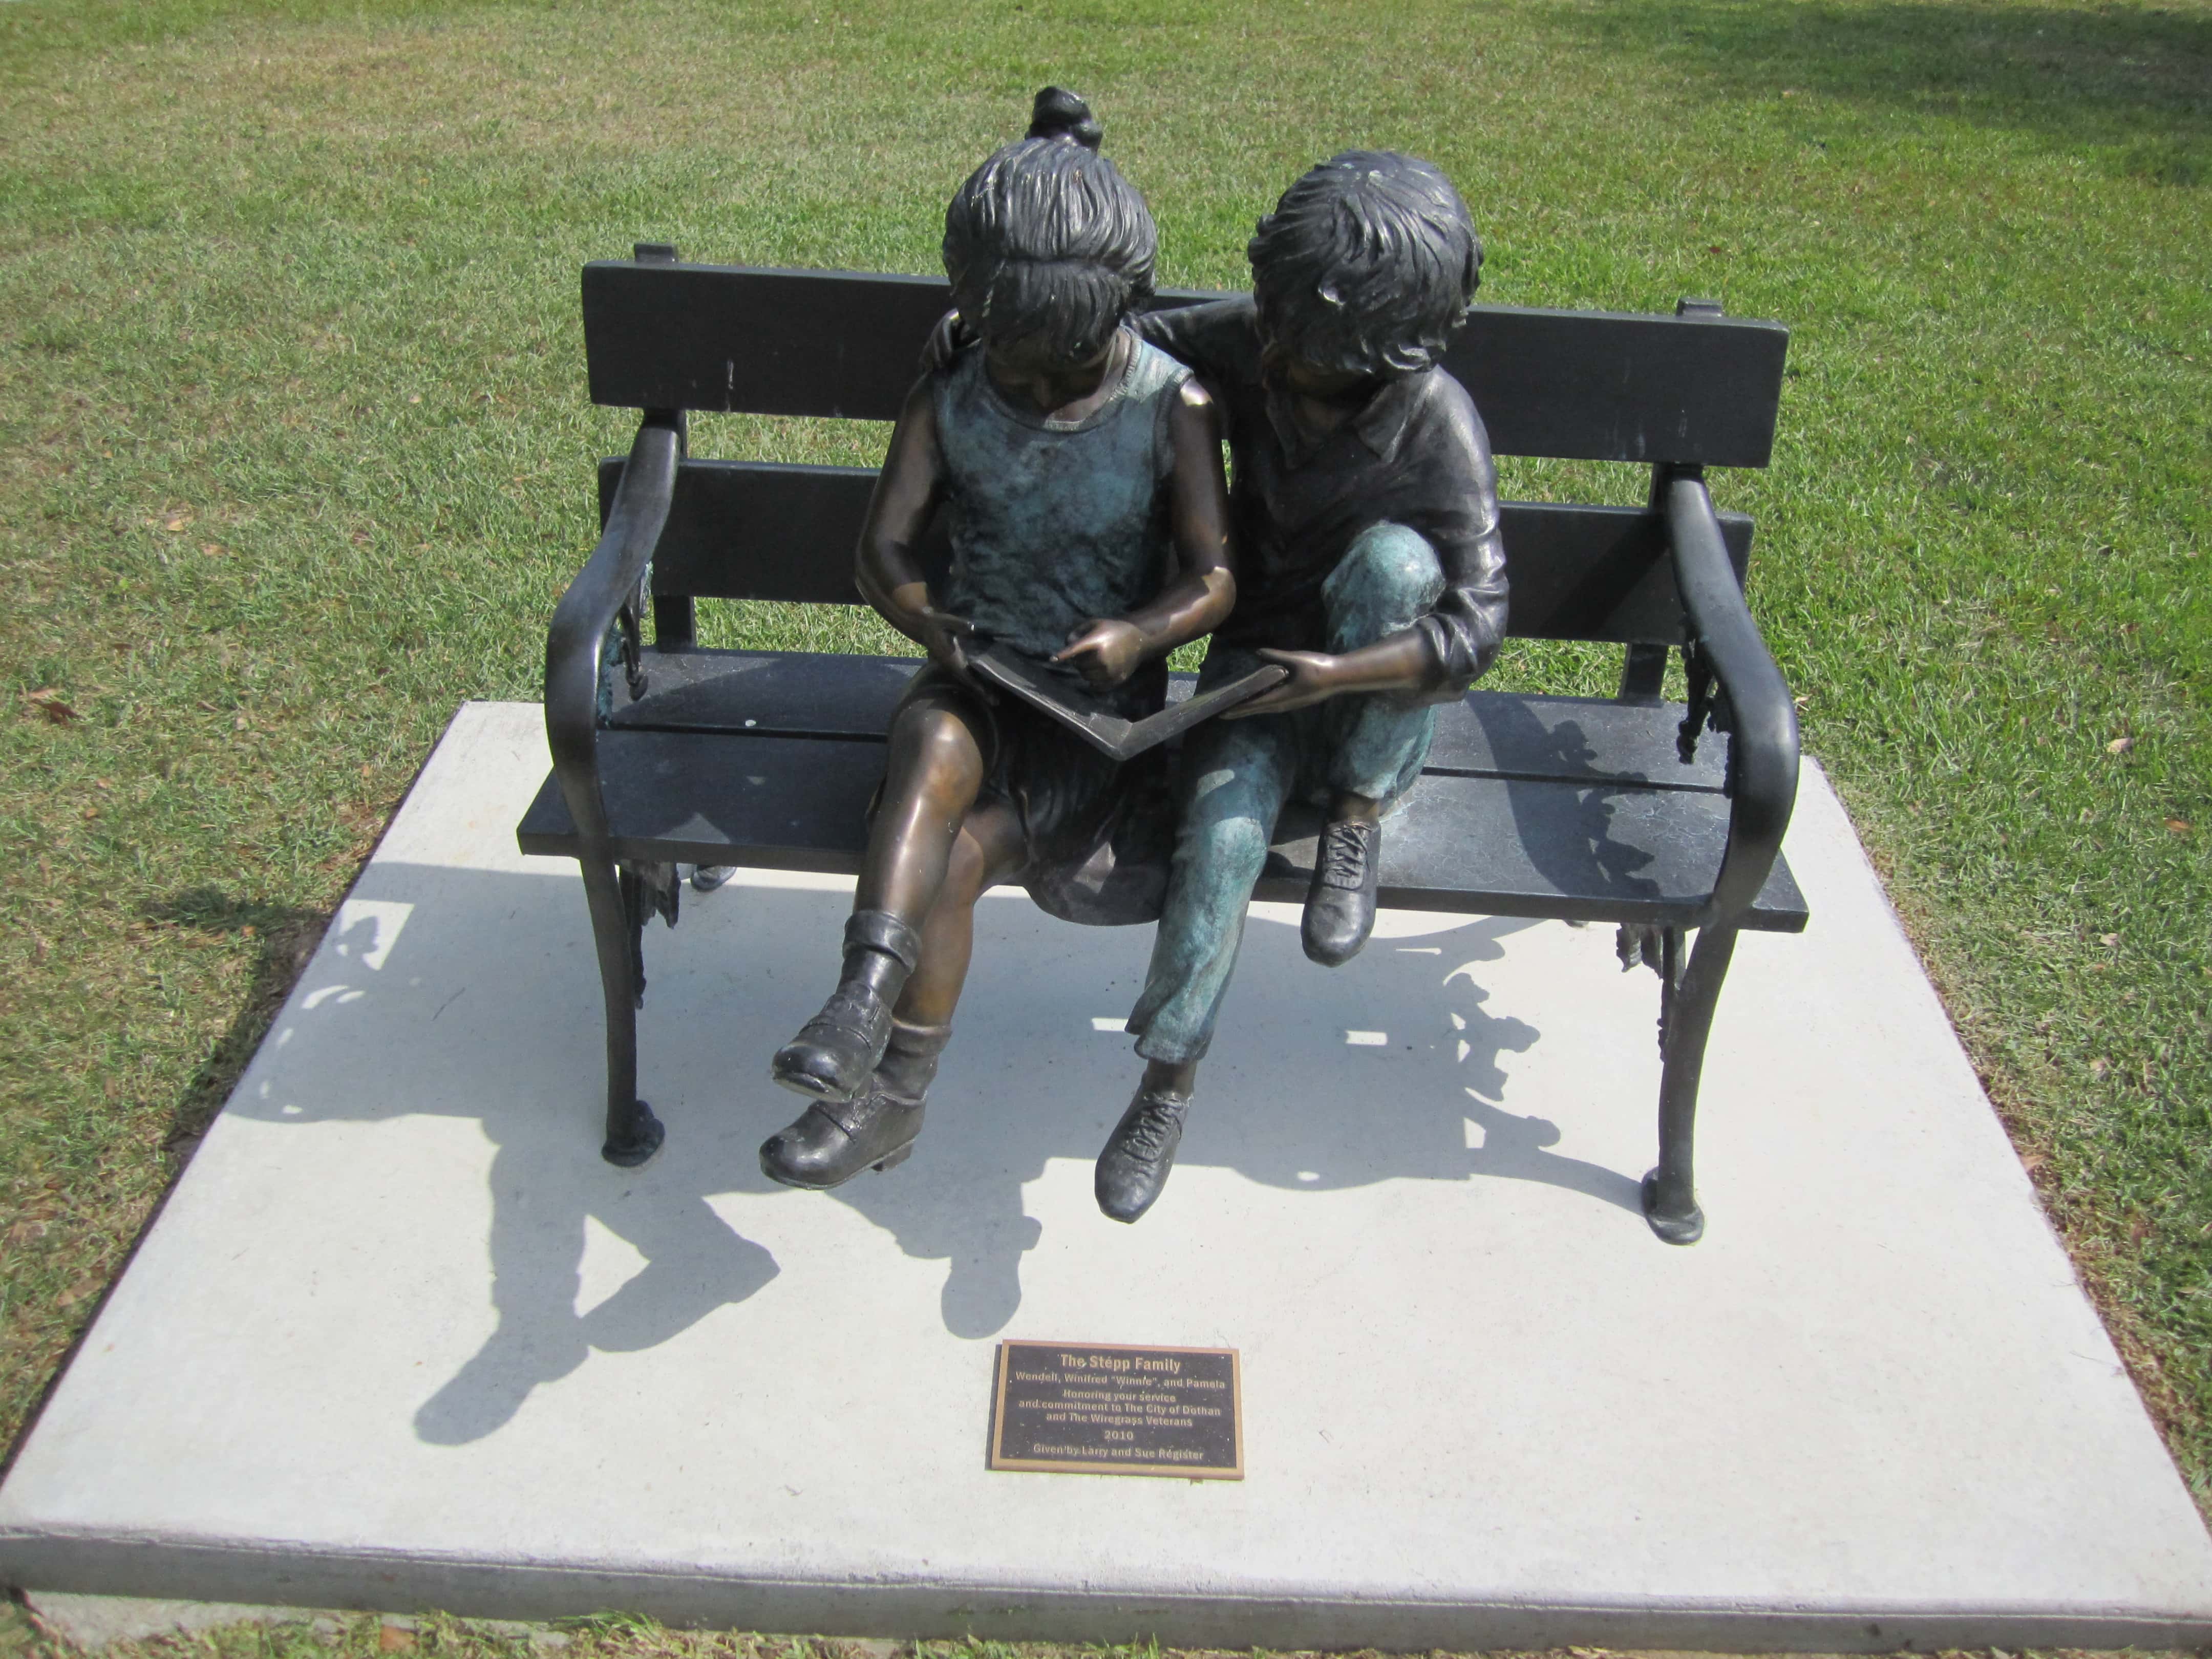 Kids on a Bench statue in Dothan Alabama